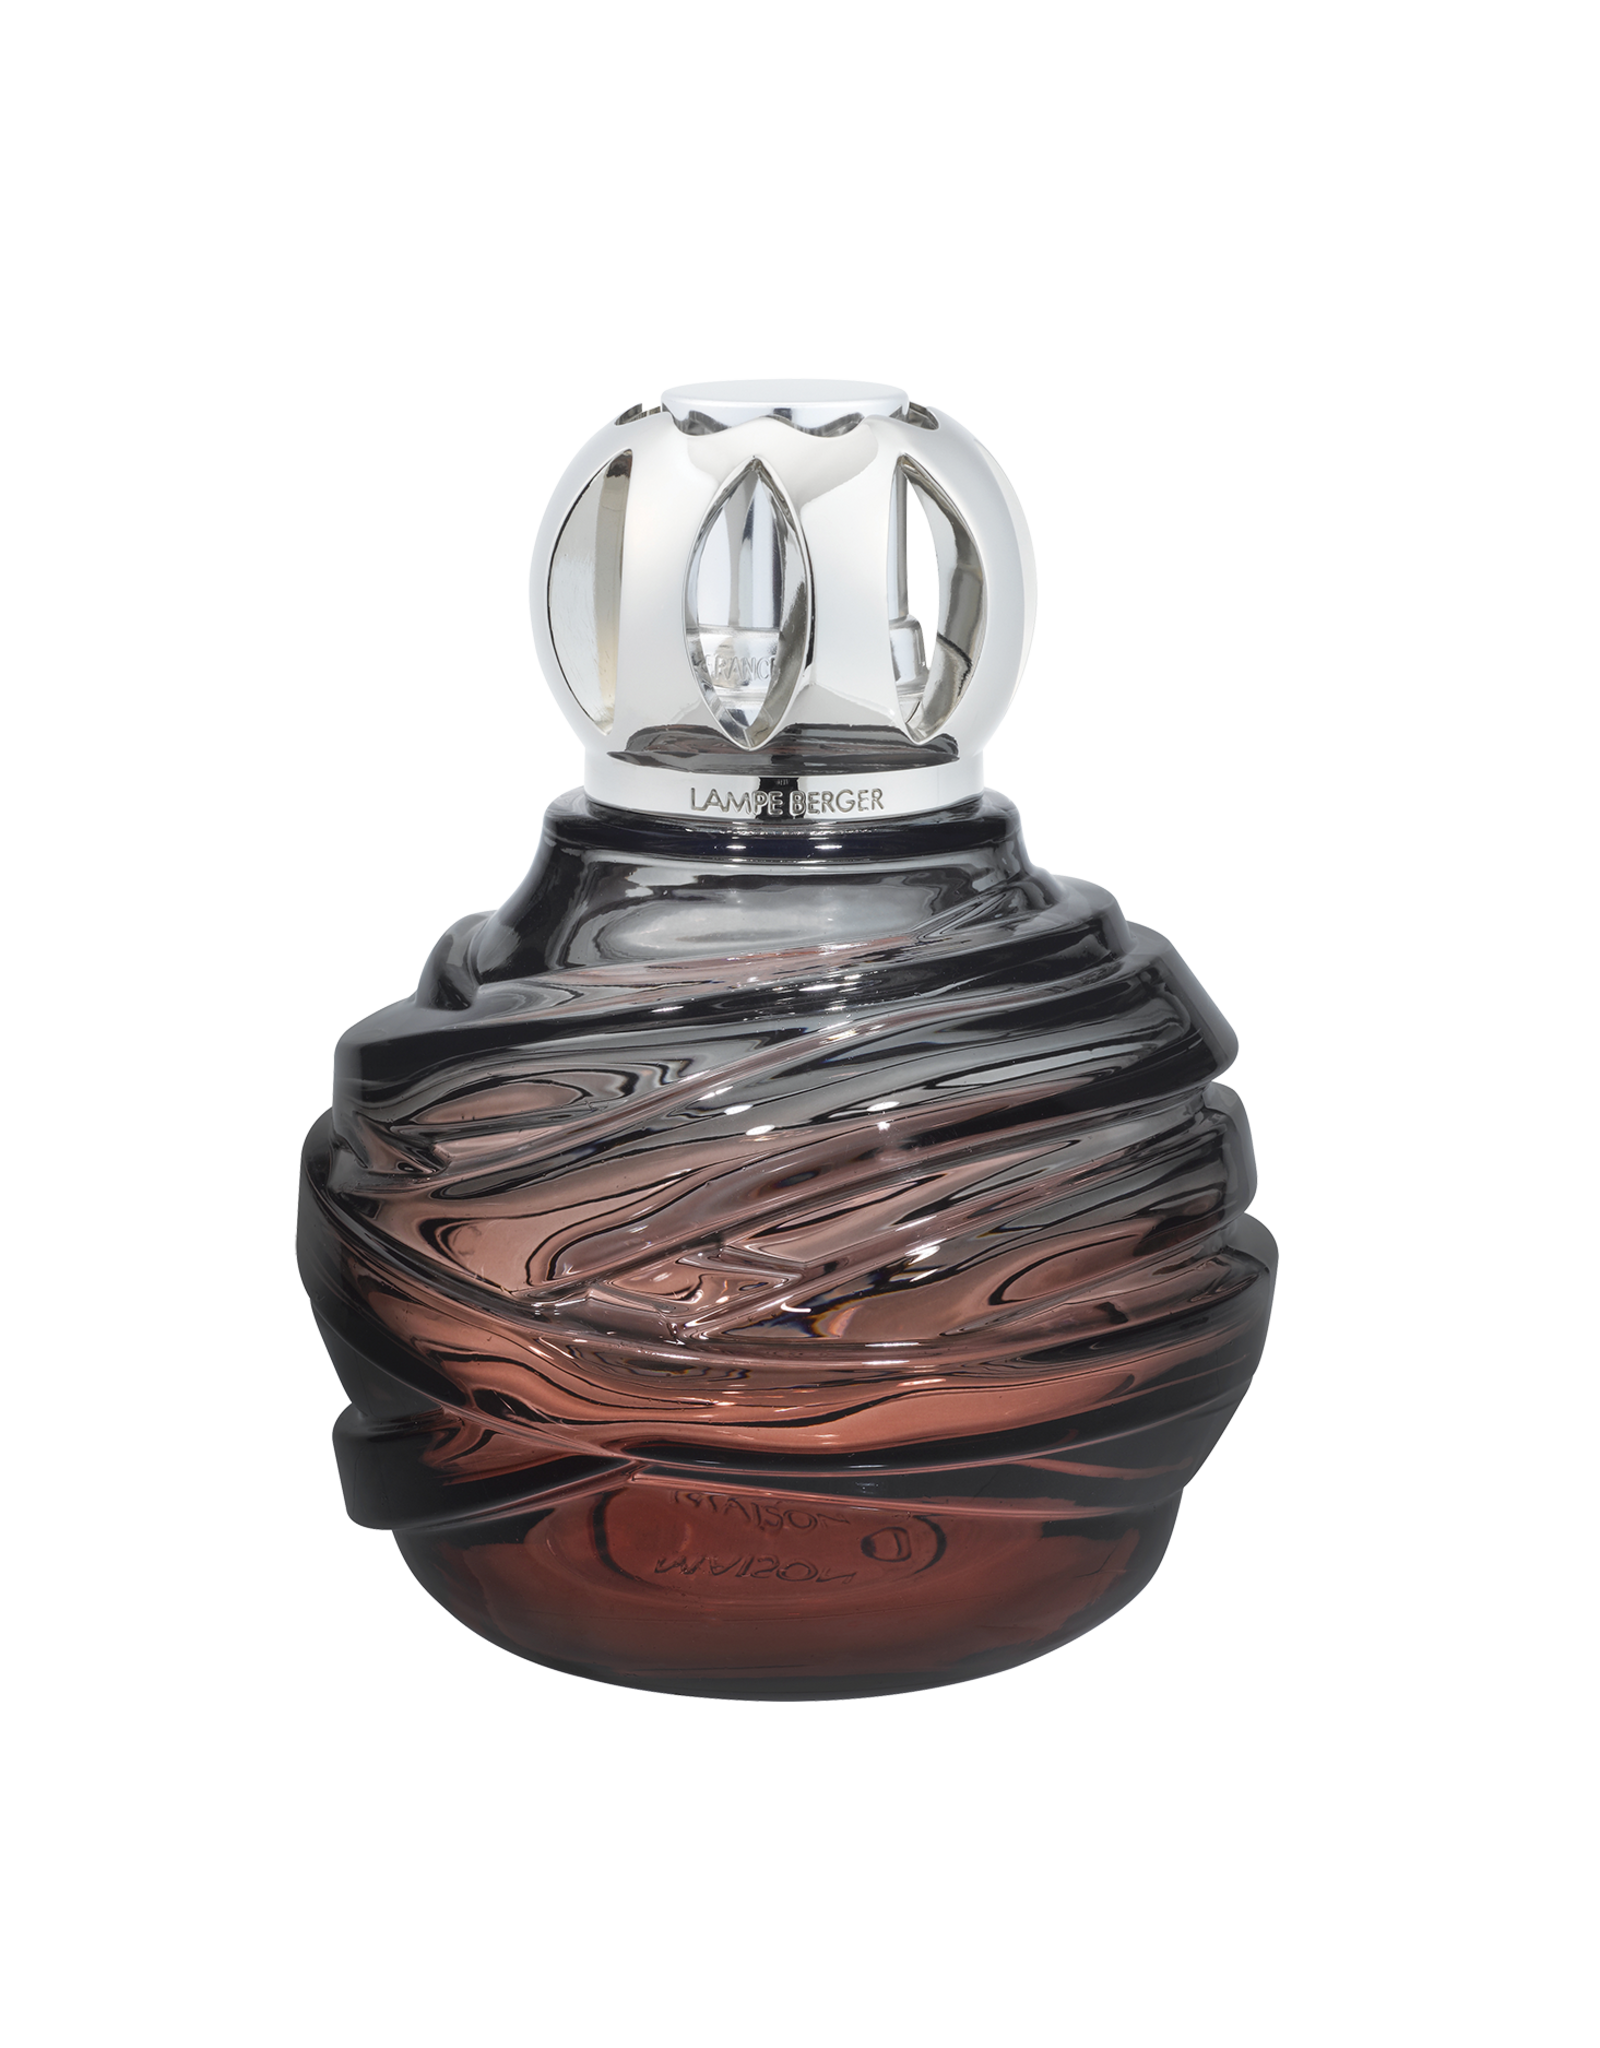 Omhoog Annoteren Glimlach Lampe Berger Dare Grey-Rouge Ombre Fragrance Lamp | Maison Berger - Digs N  Gifts